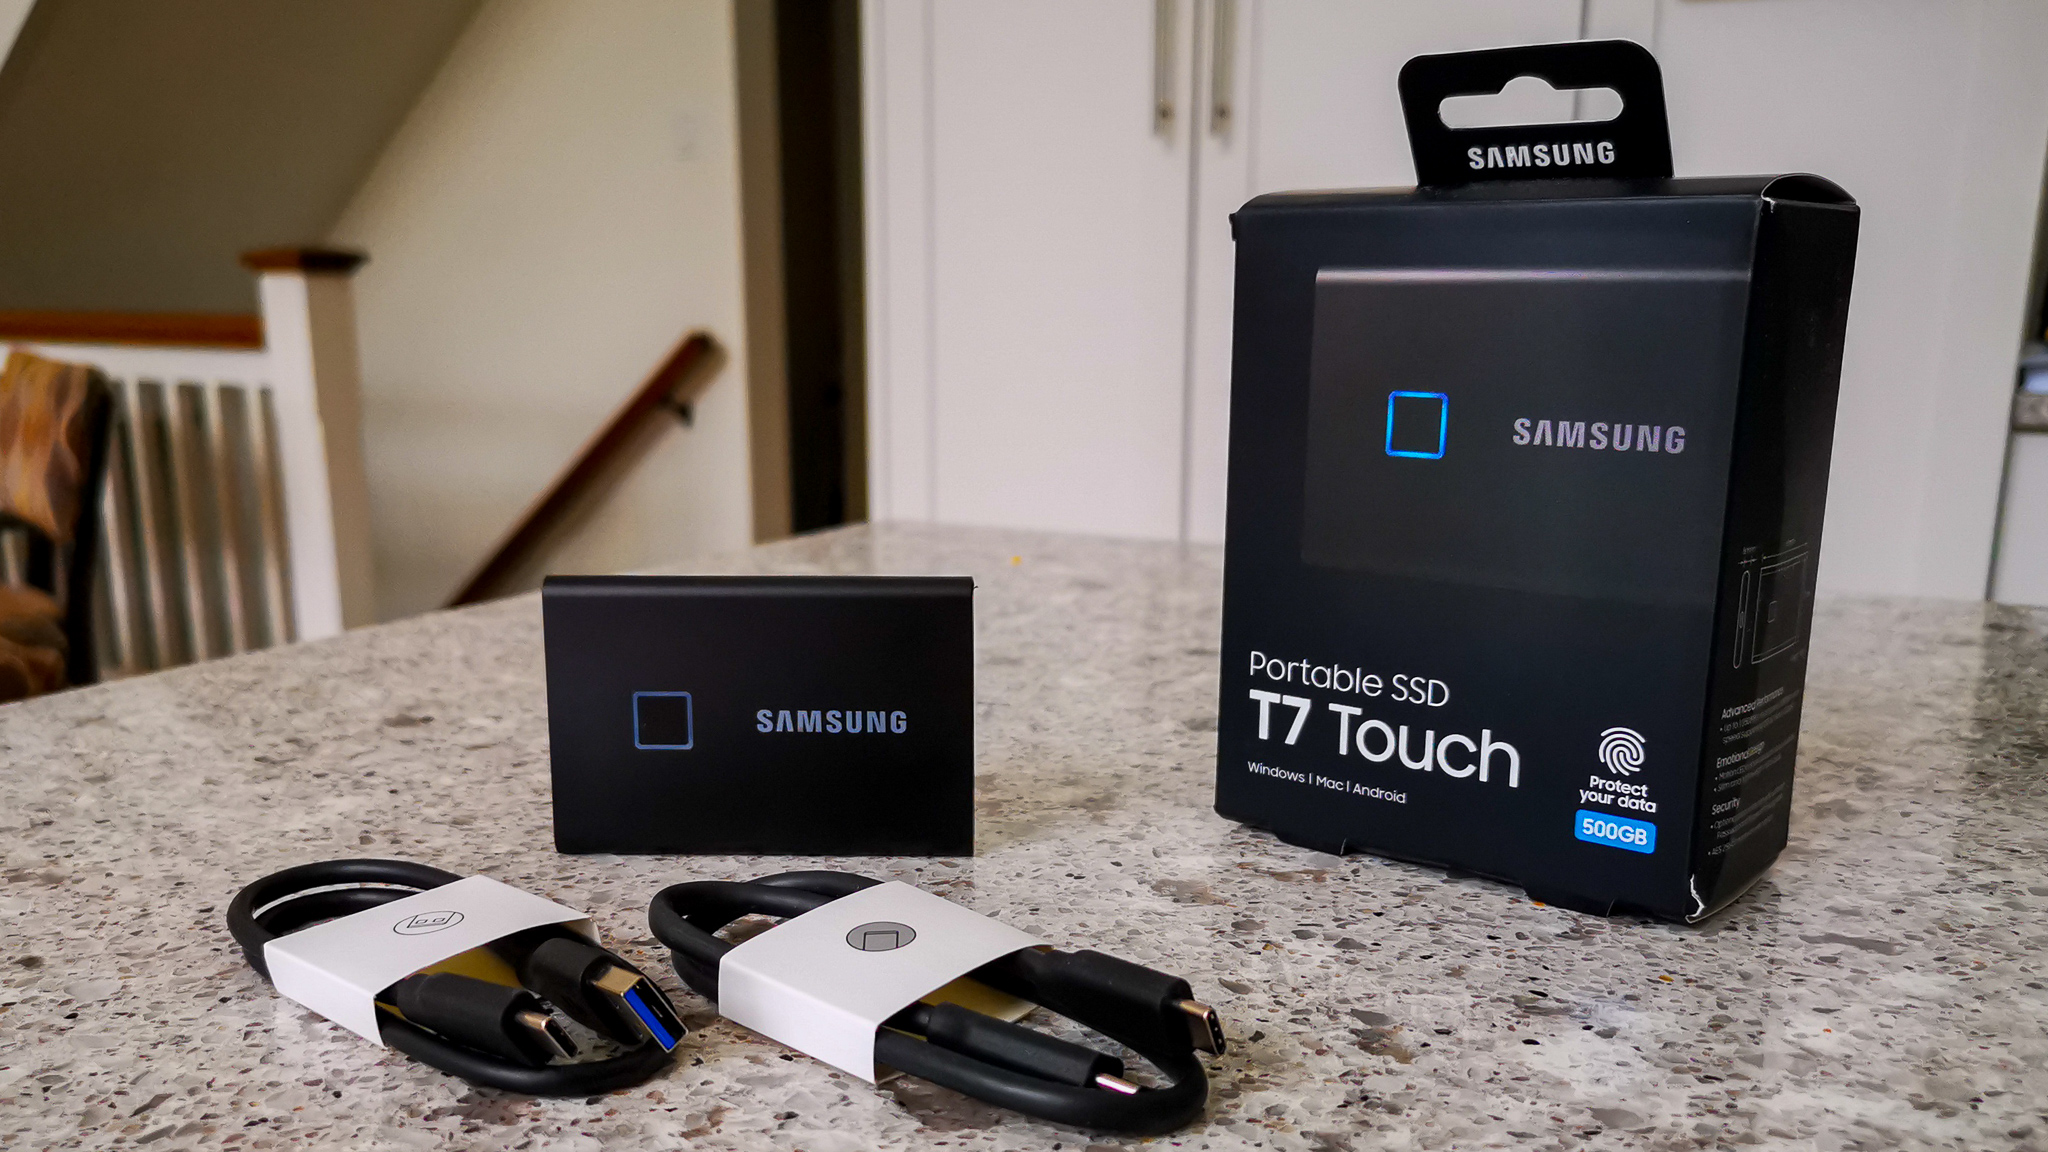 Samsung Portable SSD T7 Touch Review (500GB)